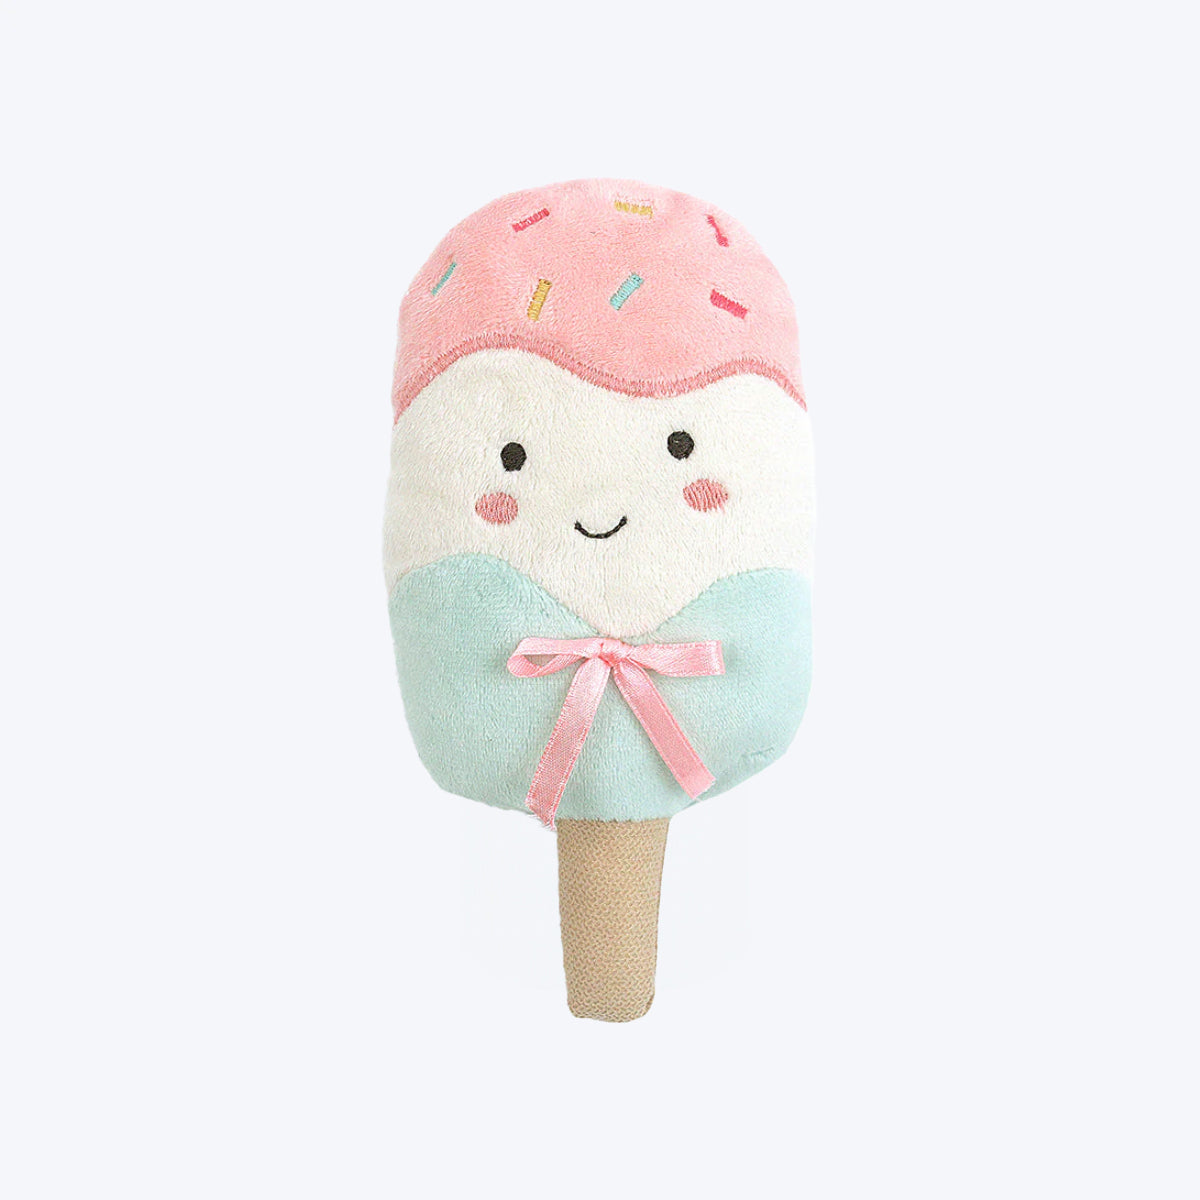 The popsicle chime plushie by Mon Ami